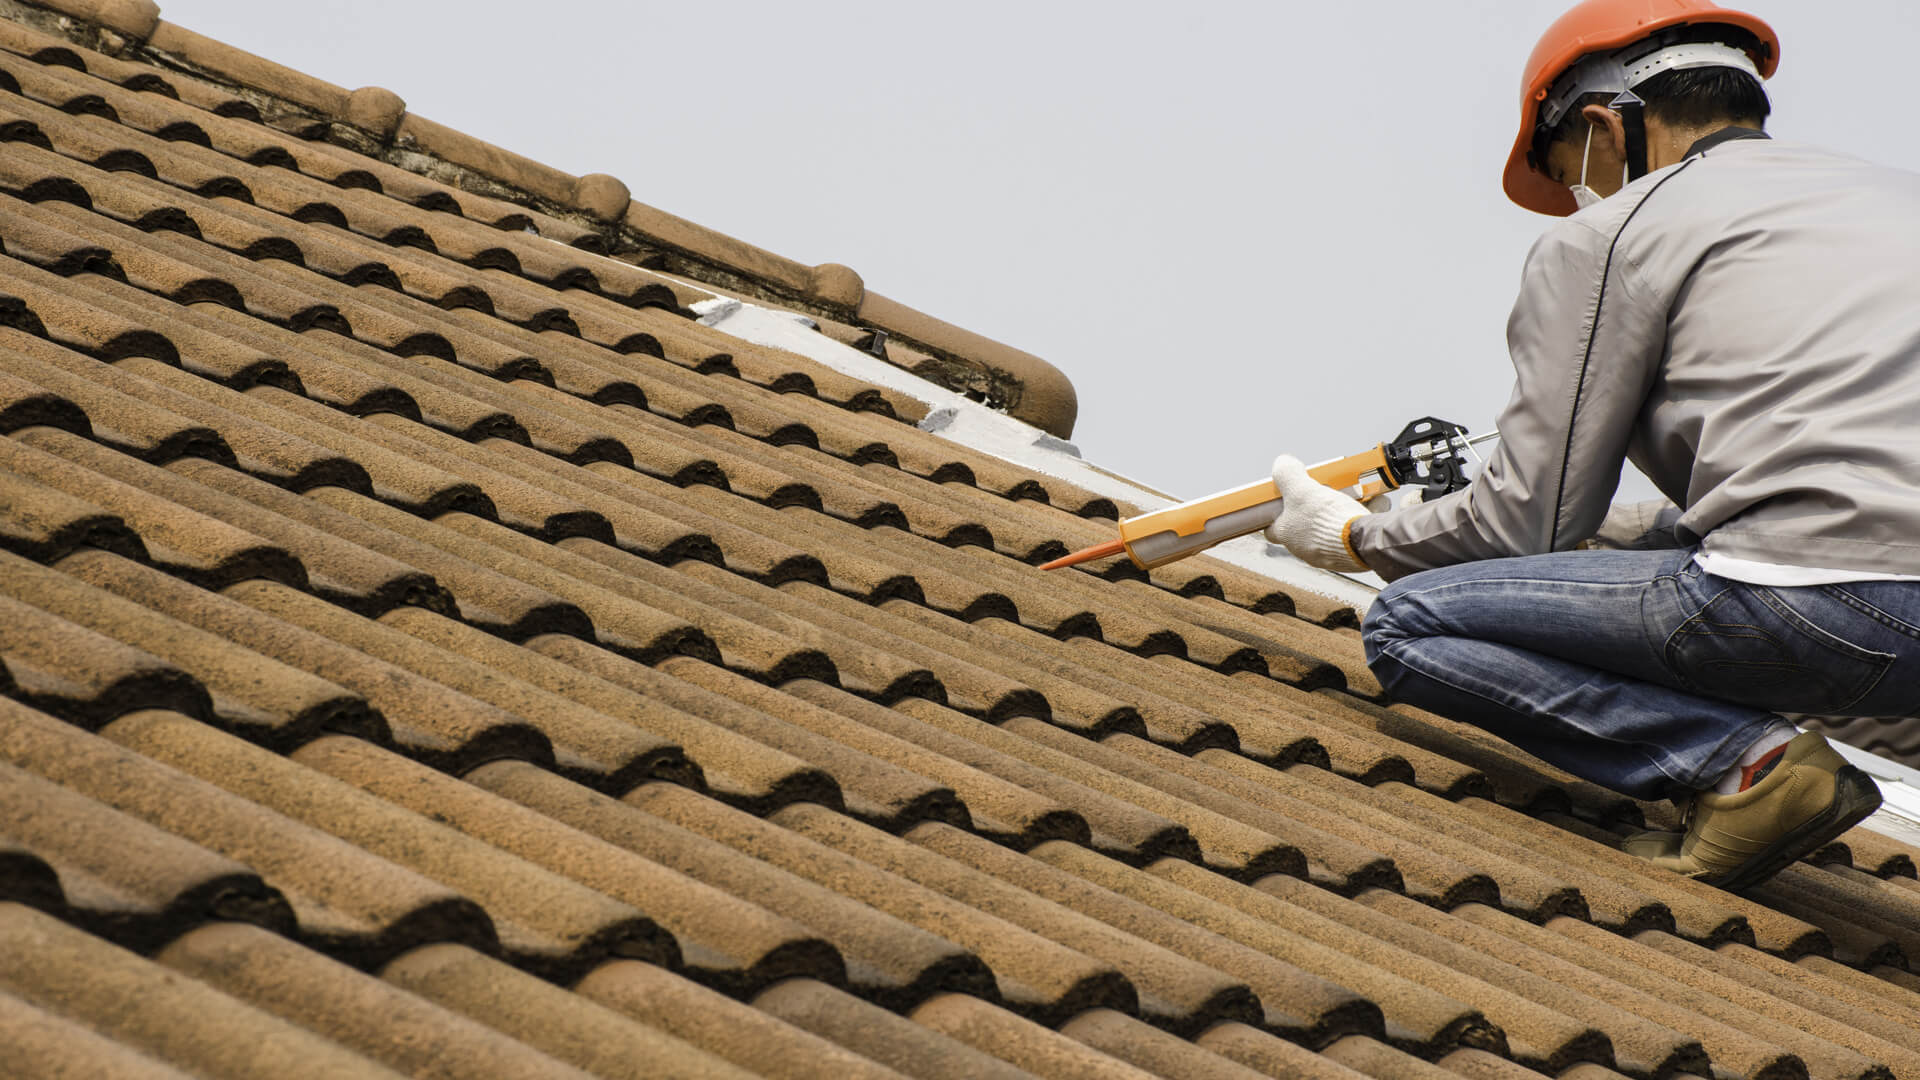 Handy Roofing Maintenance Details Every Homeowner Should Know About - Build Magazine